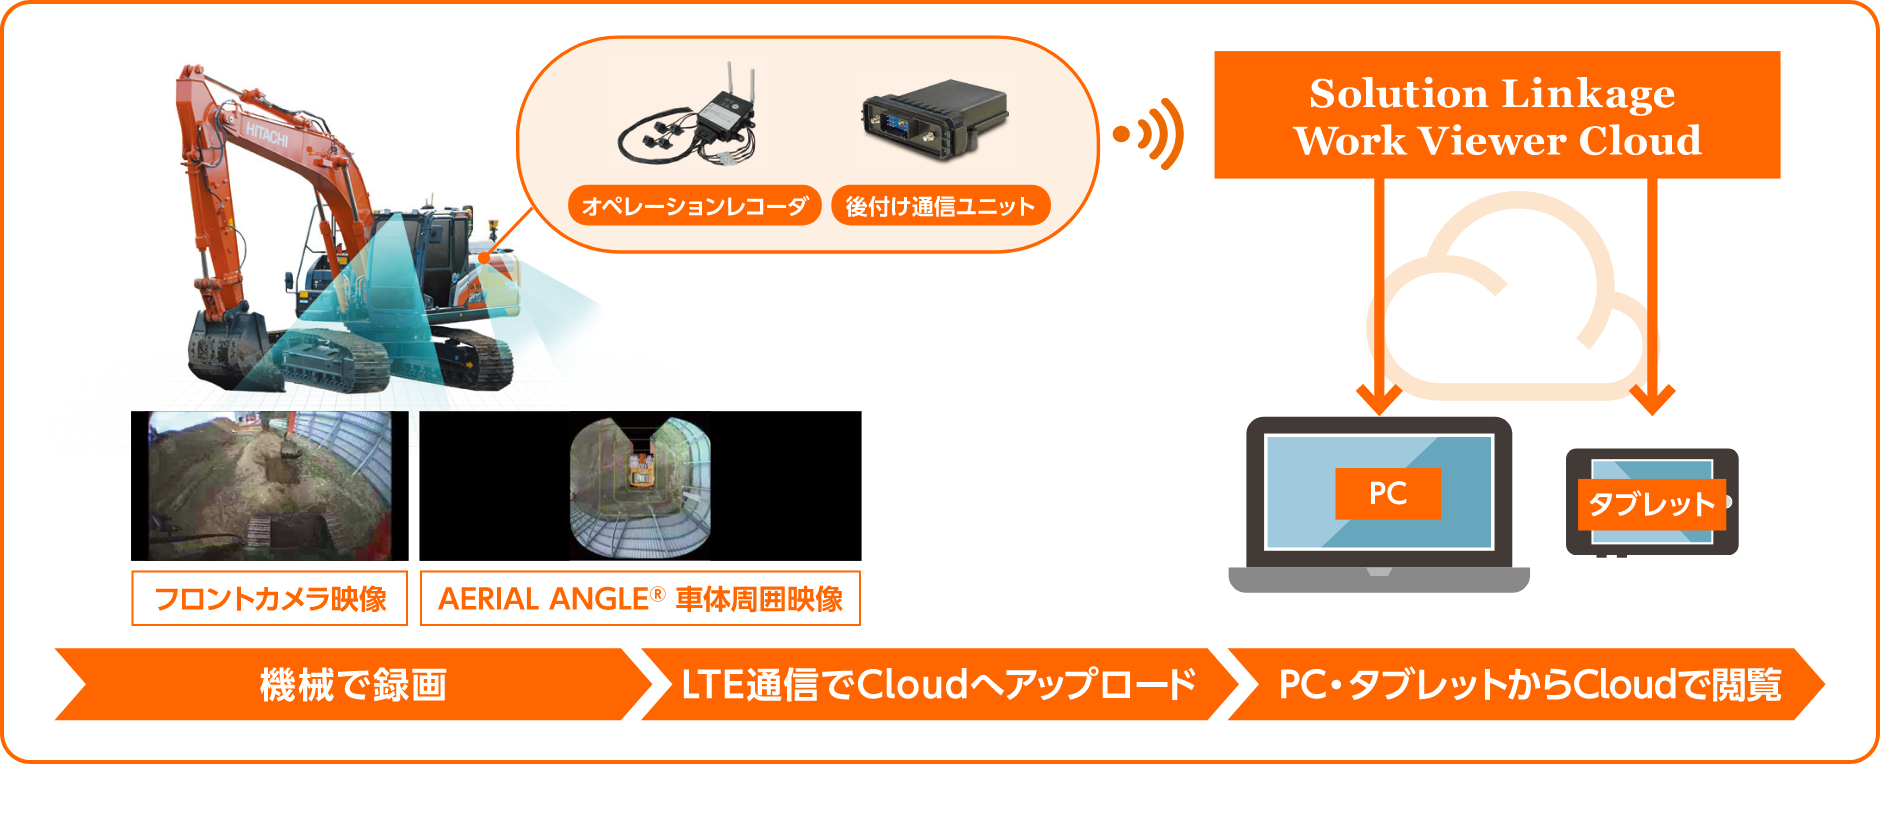 Solution Linkage Work Viewer Cloudの概要